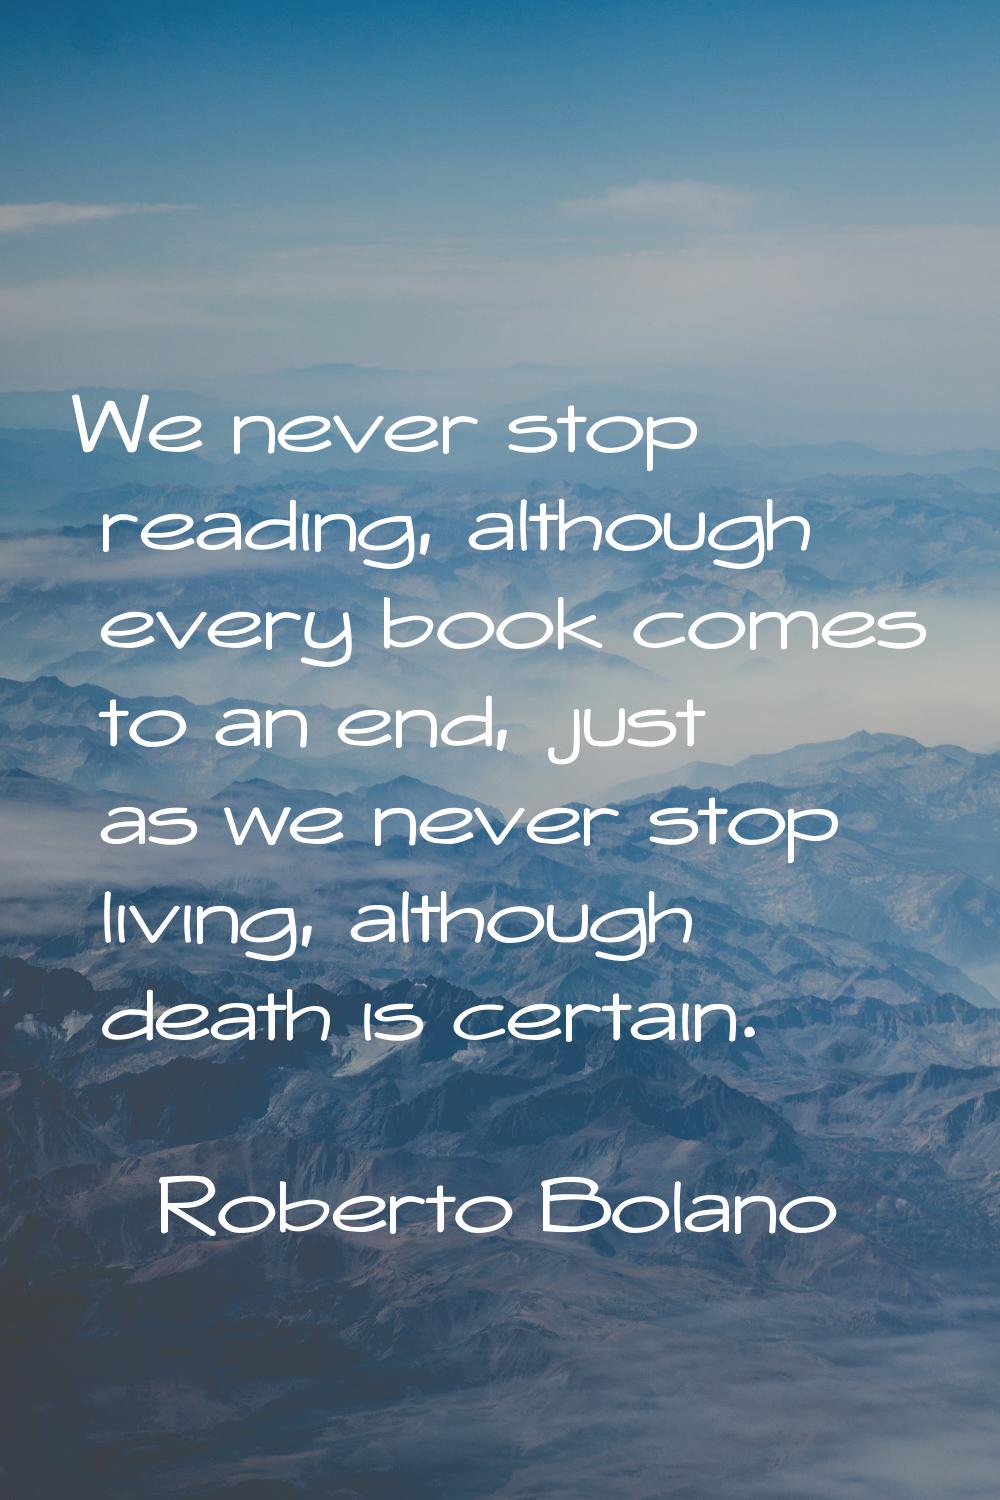 We never stop reading, although every book comes to an end, just as we never stop living, although 